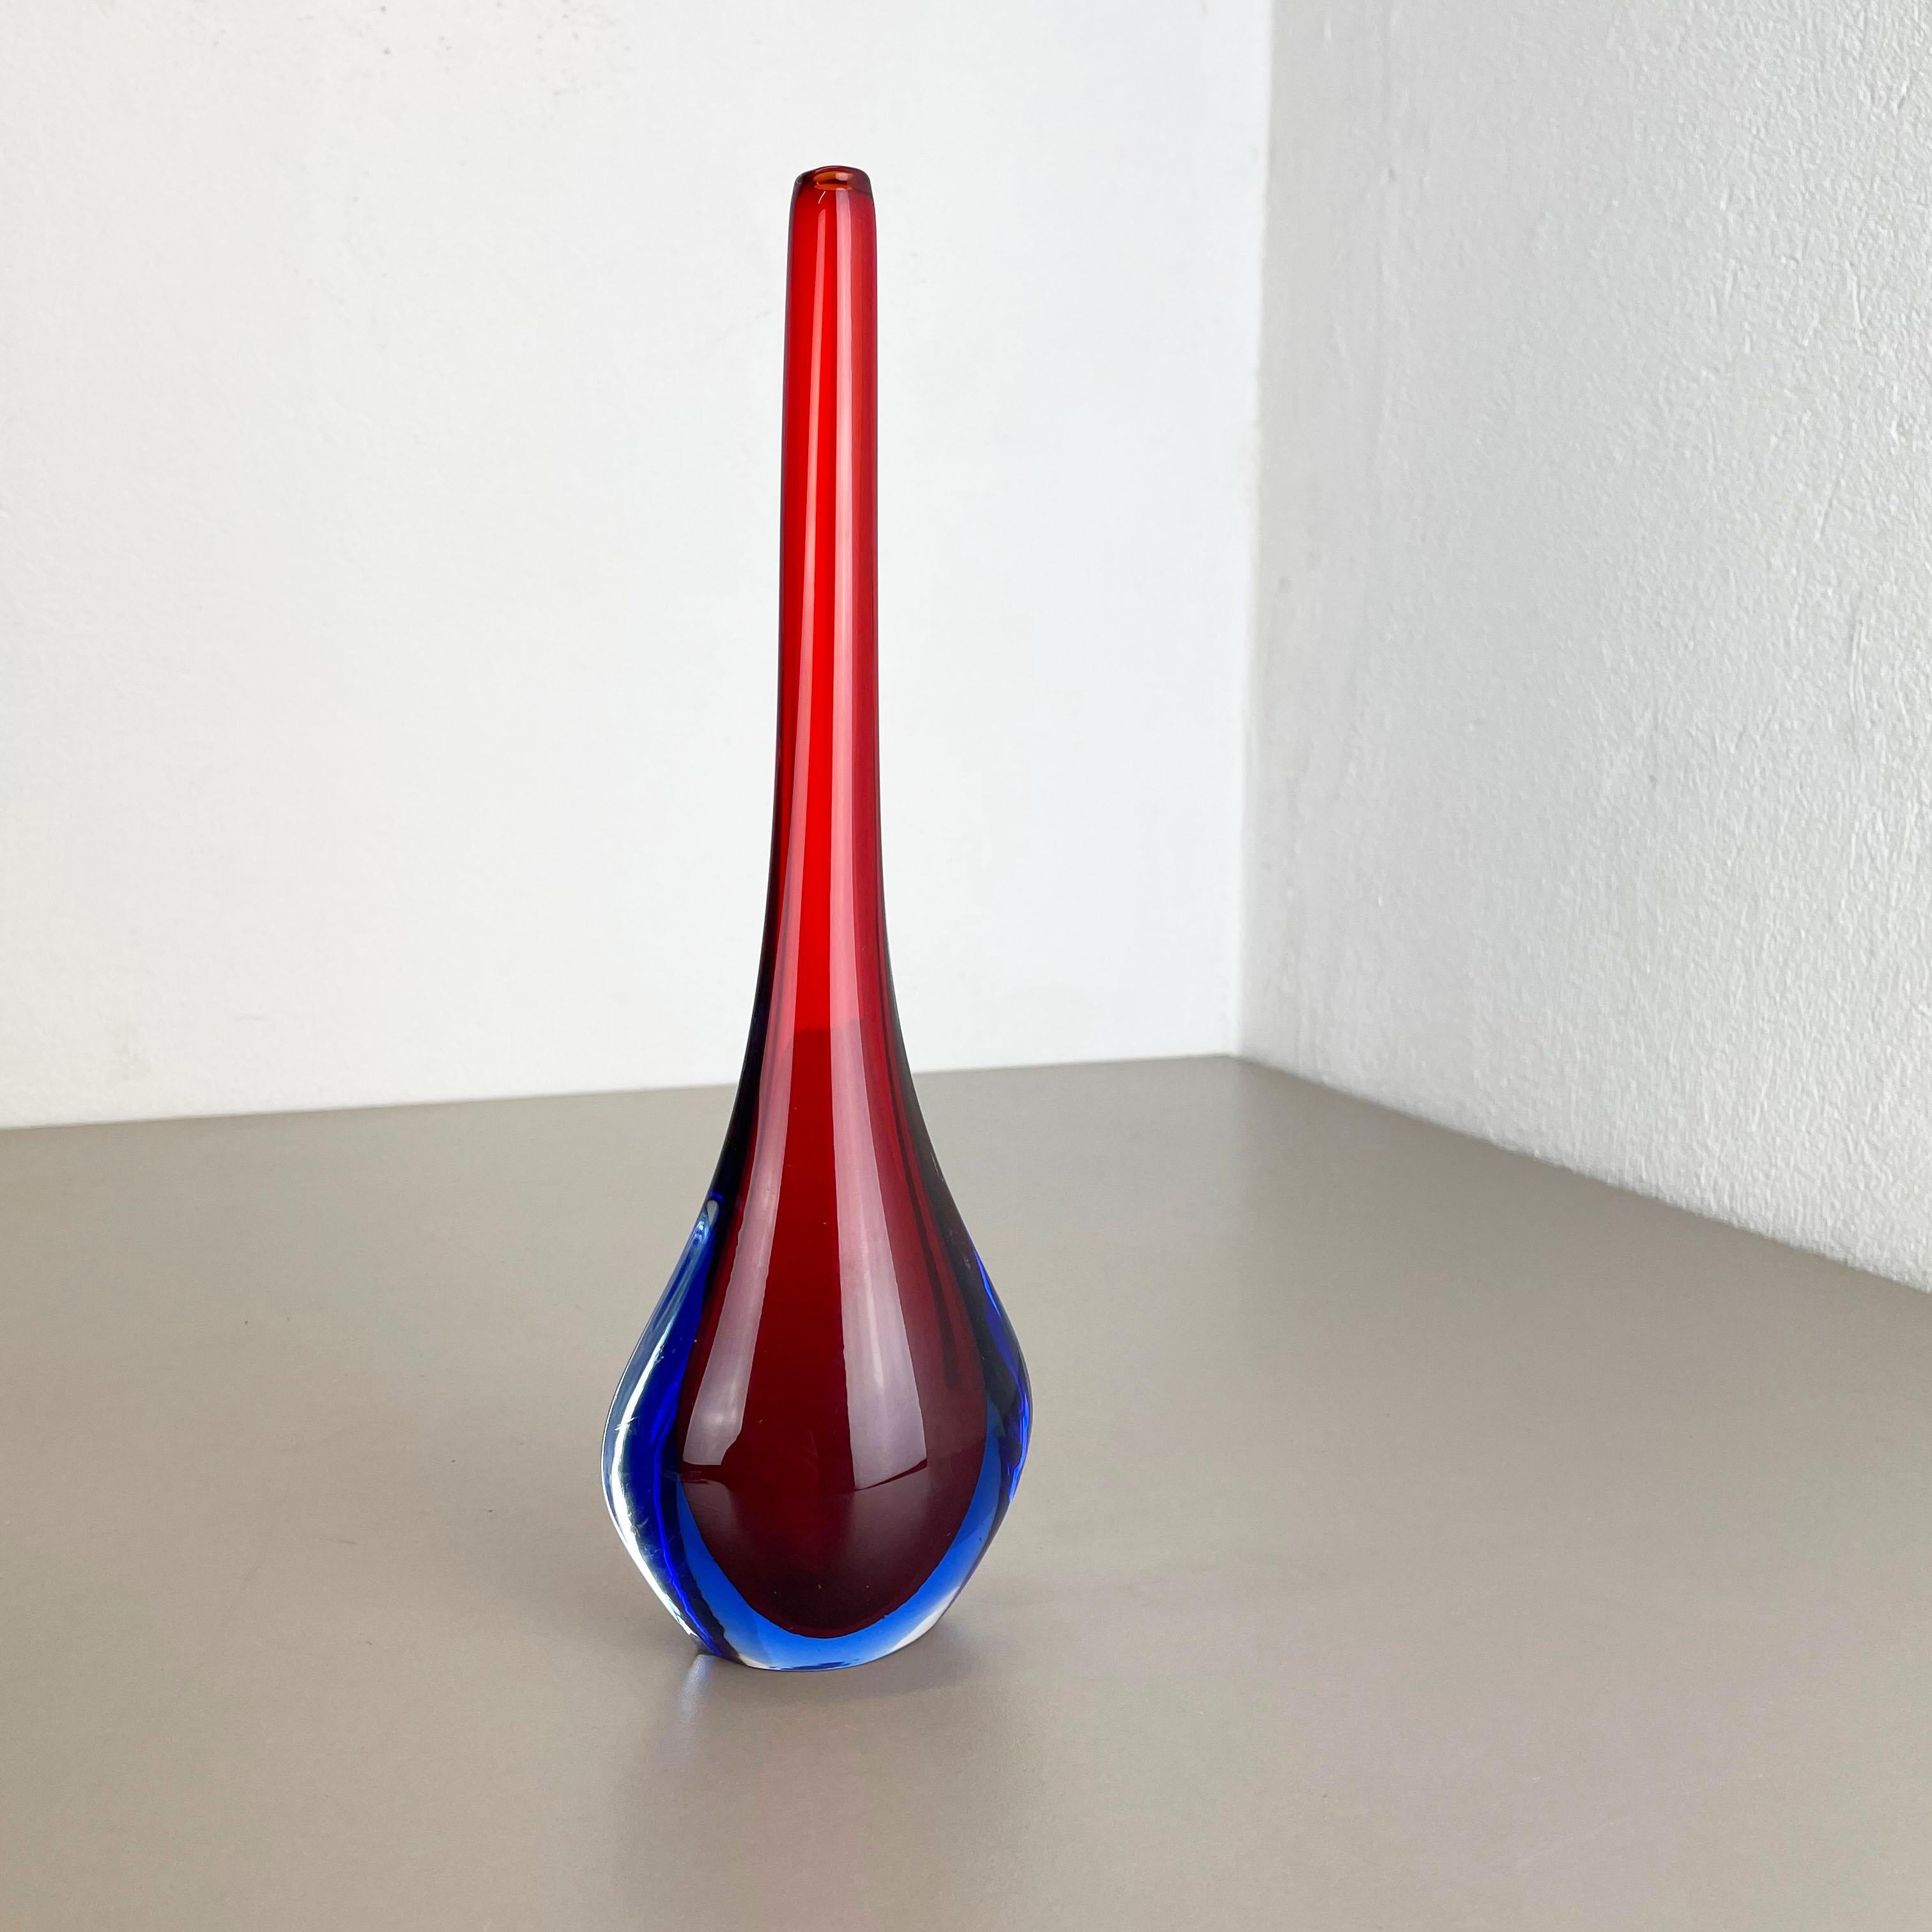 Mid-Century Modern Large 1960s Murano Glass Sommerso 29cm Single-Stem Vase by Flavio Poli, Italy For Sale